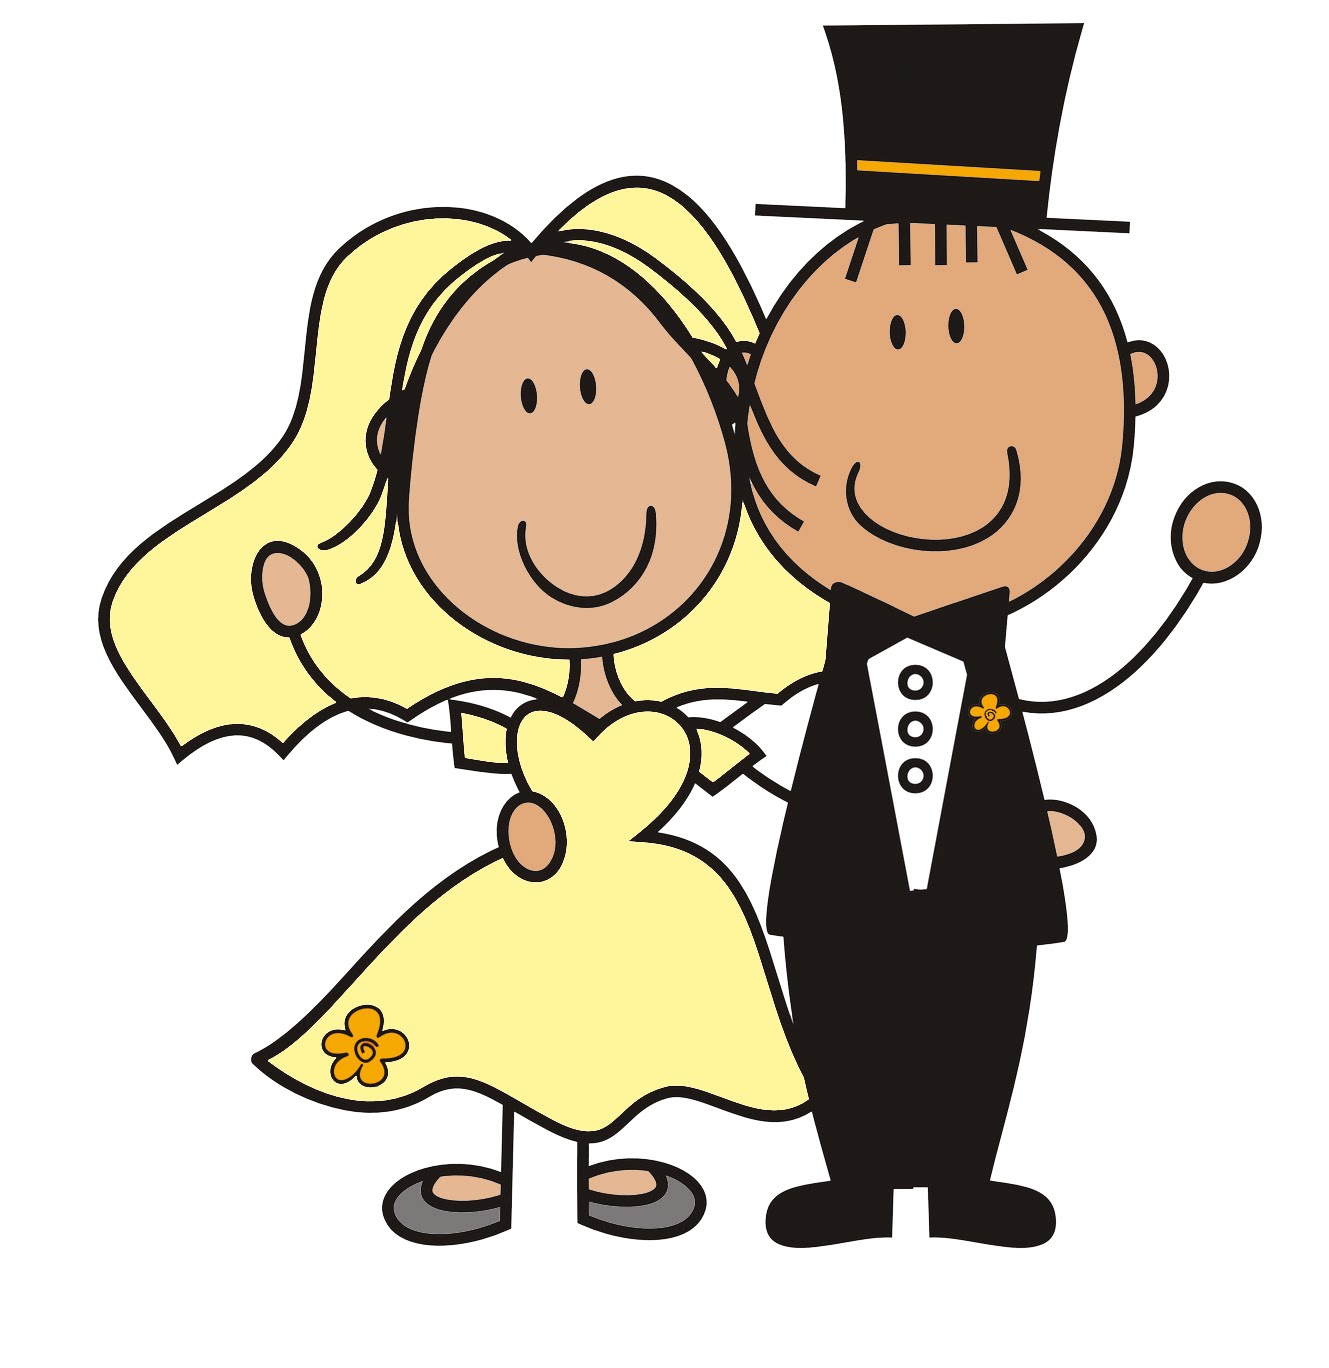 We did wedding clipart - Cliparting.com